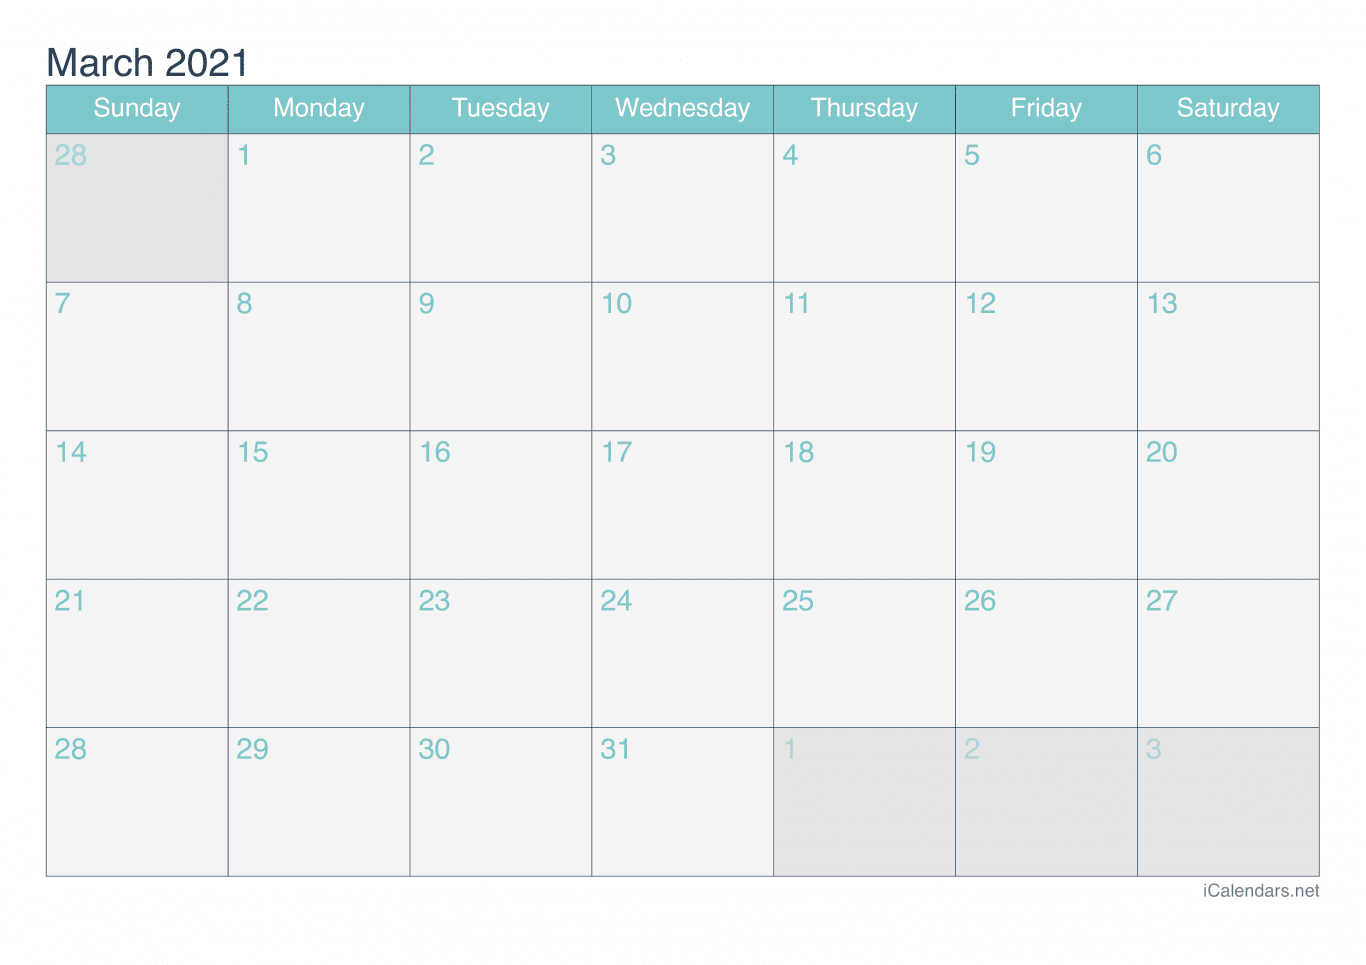 2021 March Calendar - Turquoise